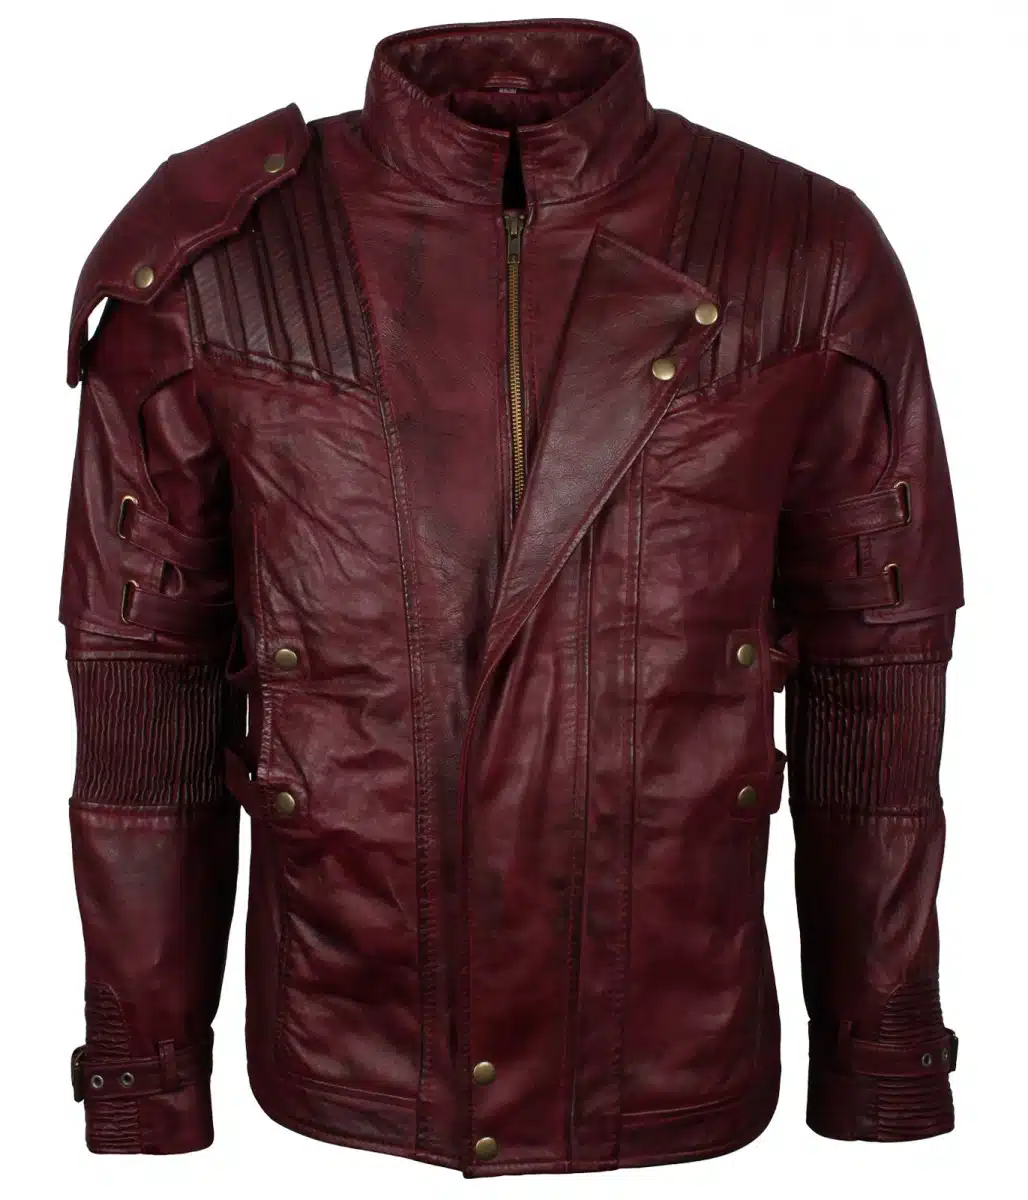 Maroon Star Lord Cosplay Leather Jacket